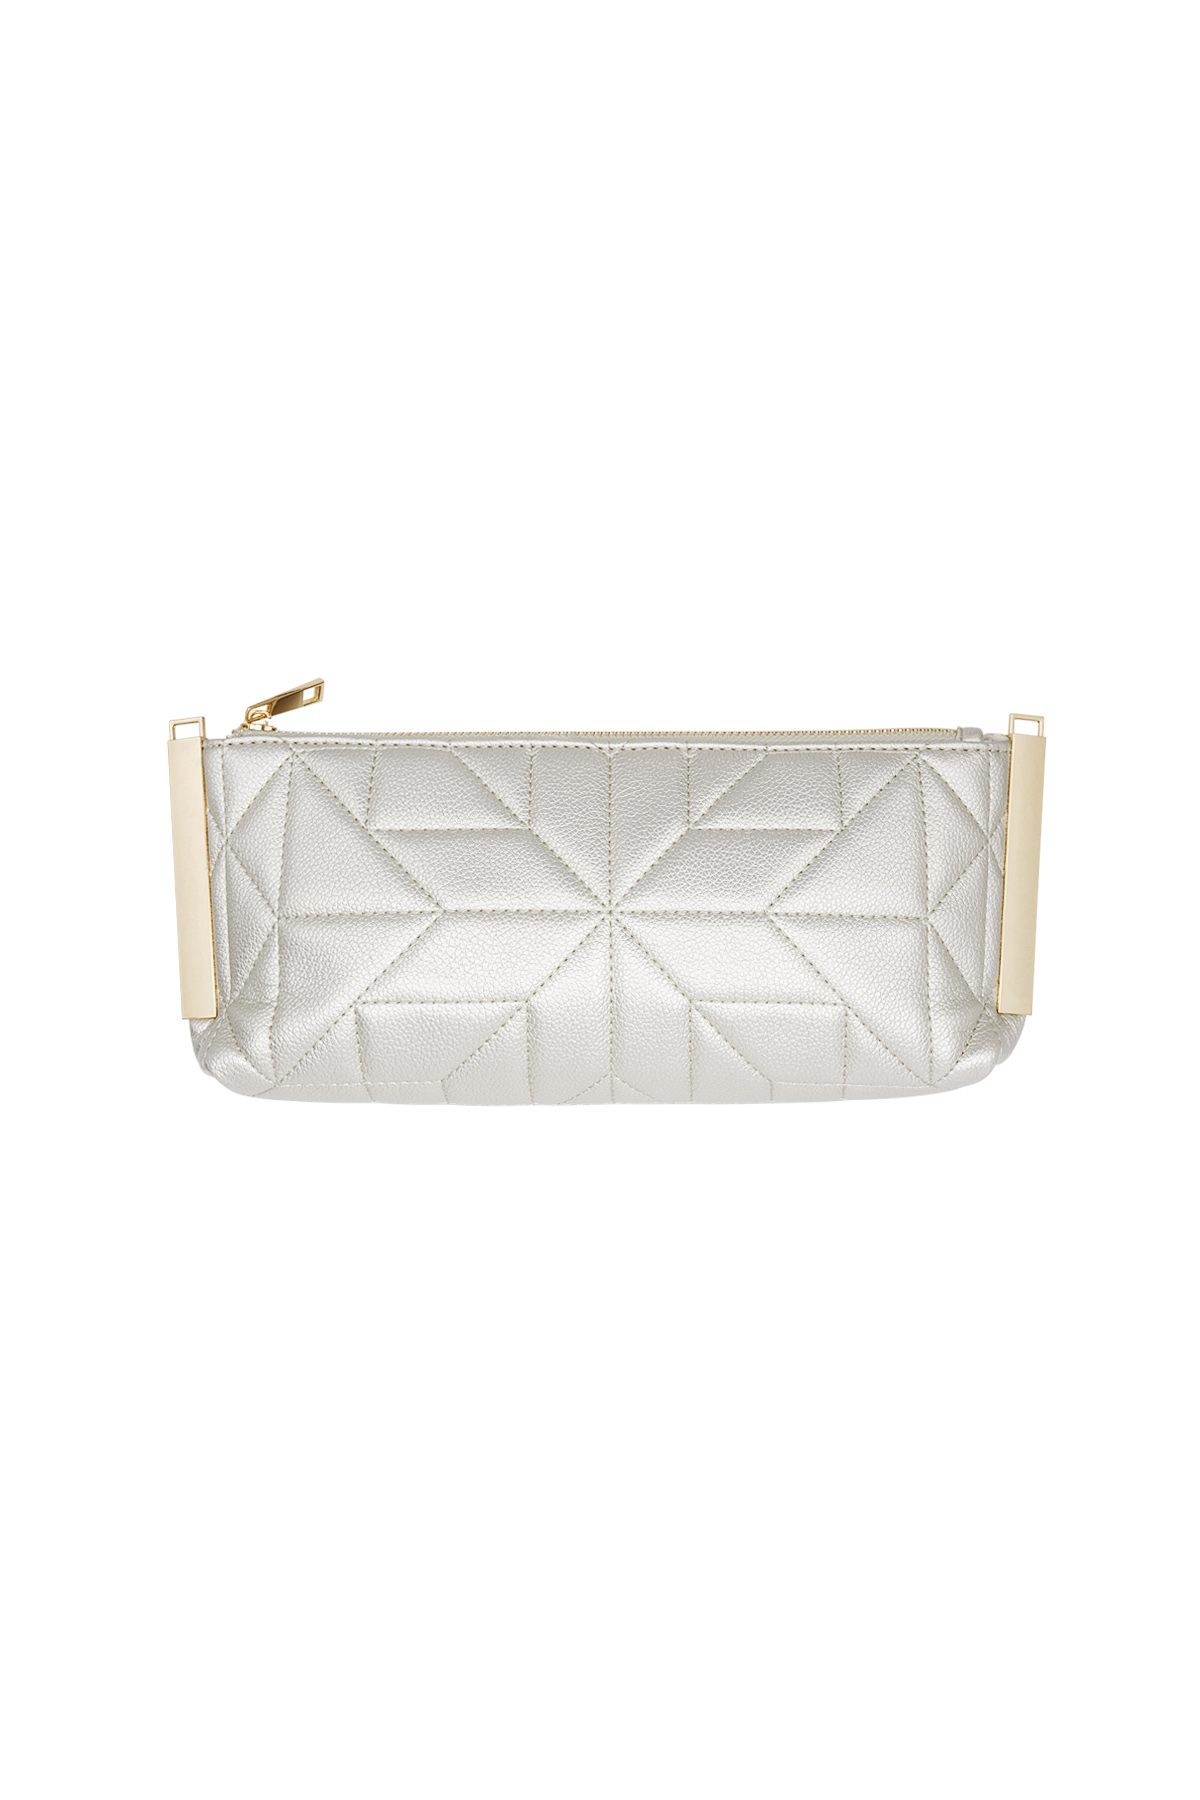 Stitched clutch with gold hardware - gold h5 